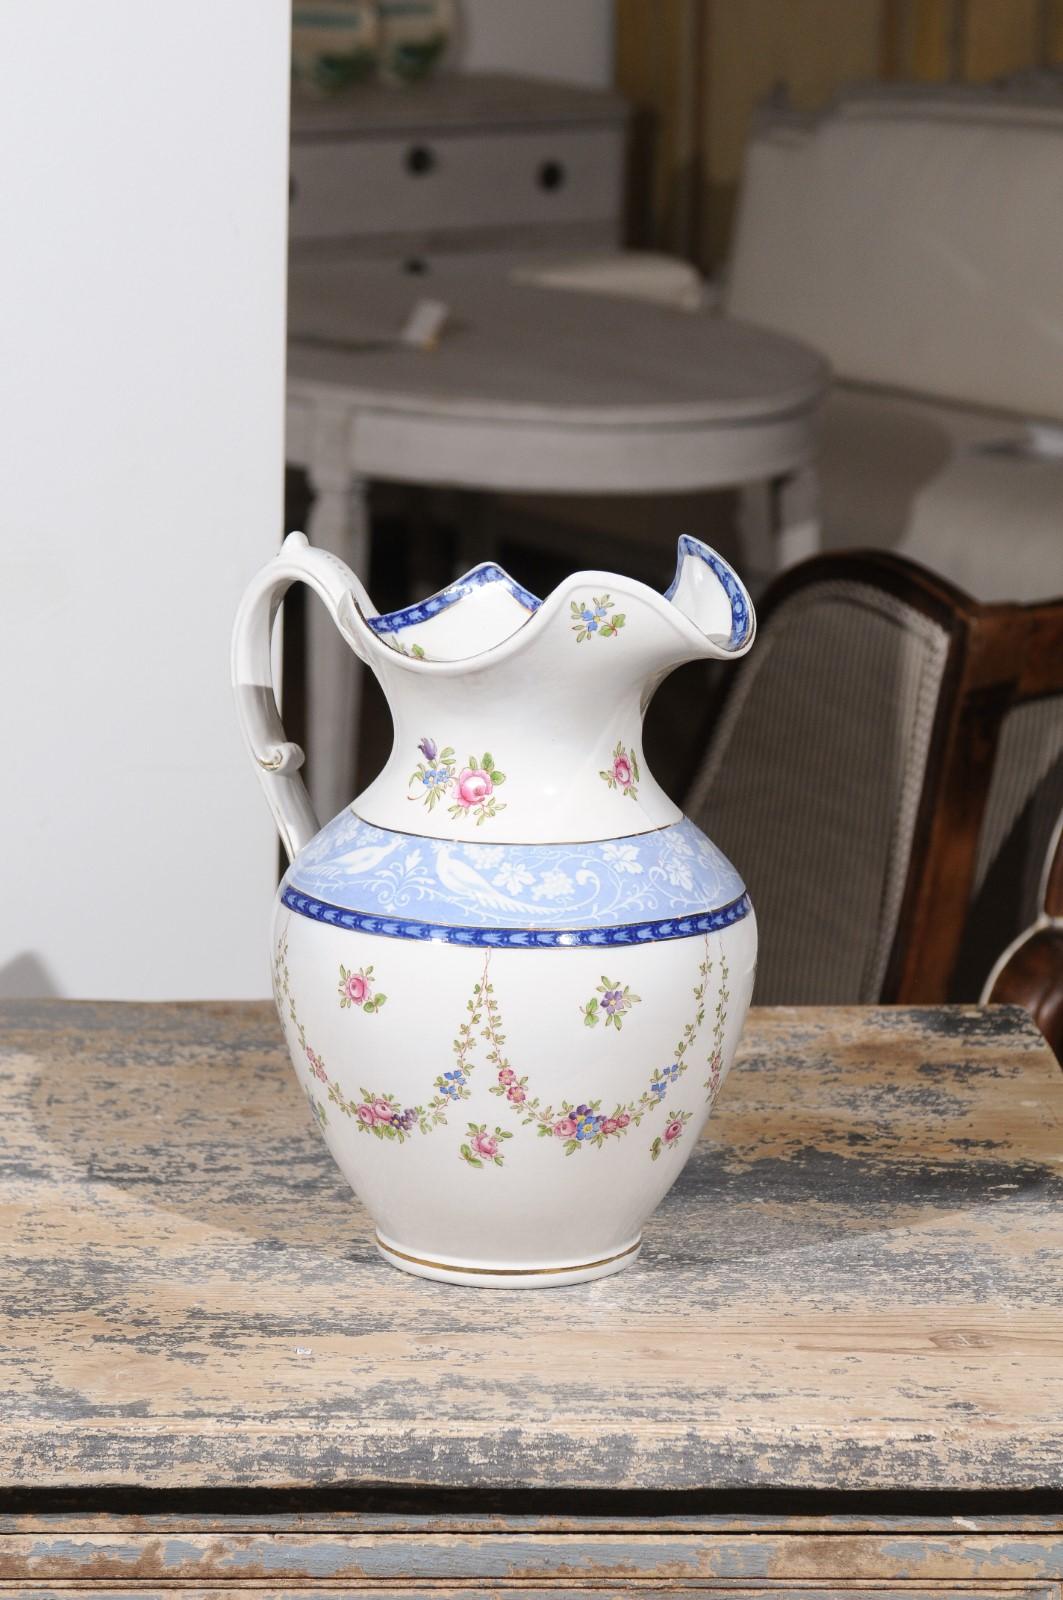 An English Booth's silicon China cameo pattern pitcher from the early 20th century, with pink roses and blue and white pheasants. Born in England during the early years of the 20th century, this exquisite pitcher features a lovely decor made of